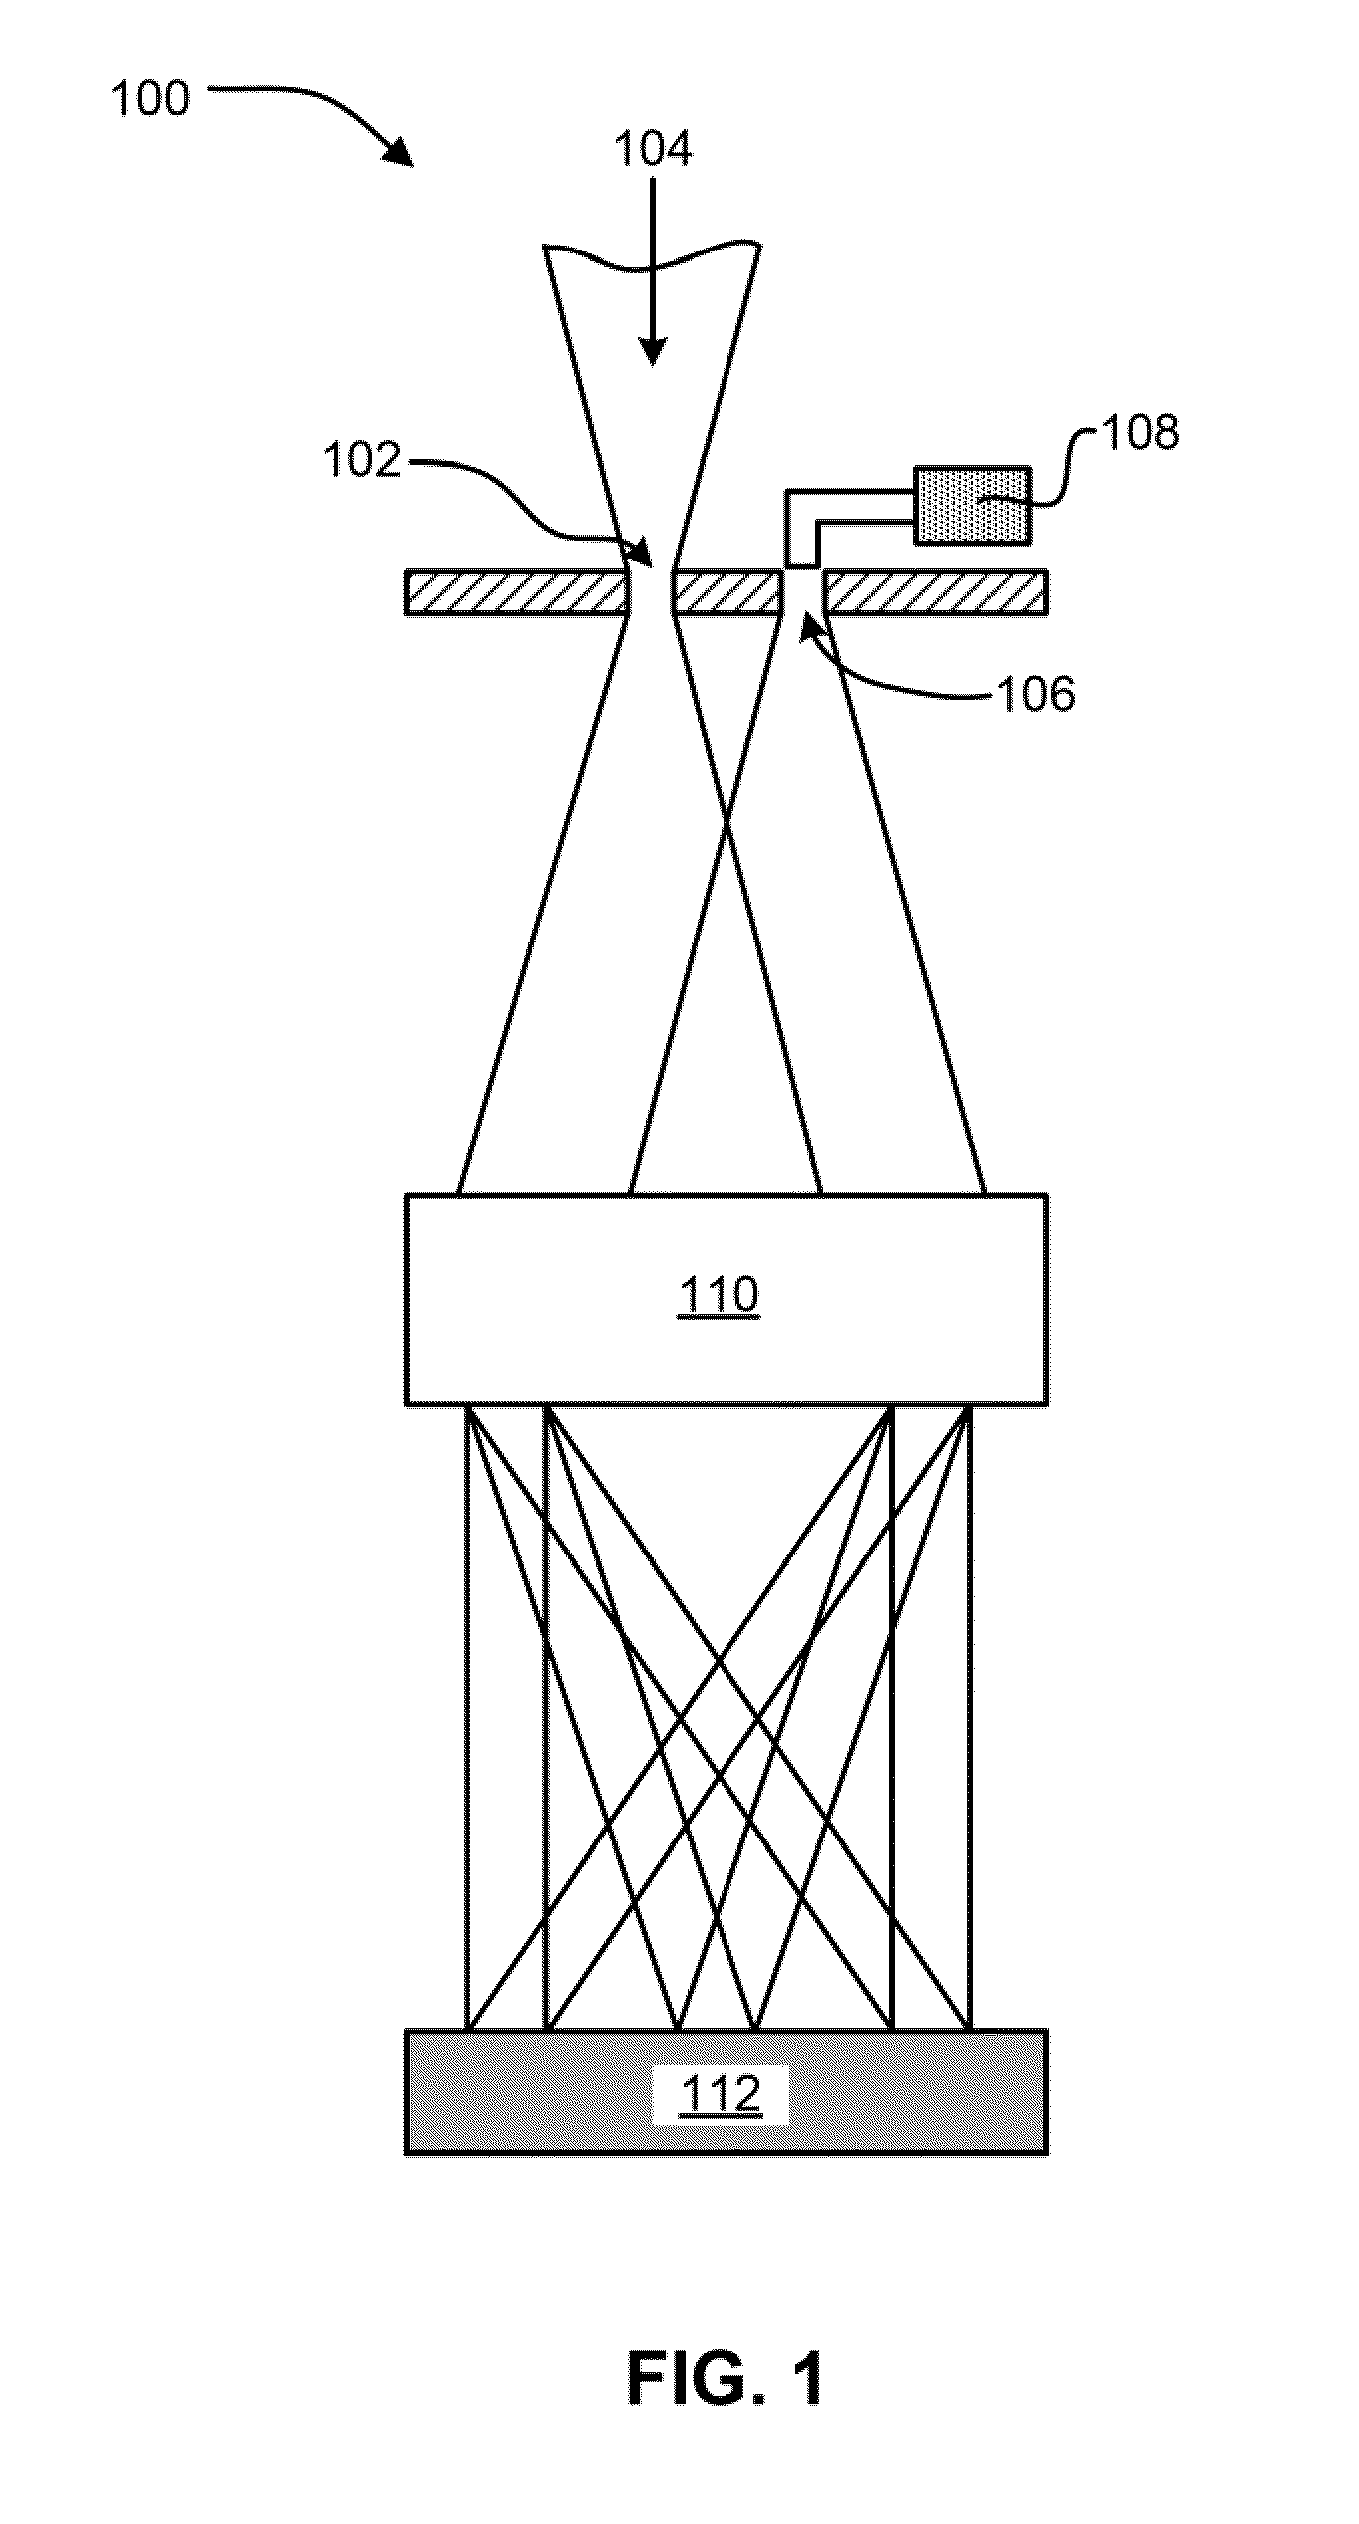 Room-temperature quantum noise limited spectrometry and methods of the same